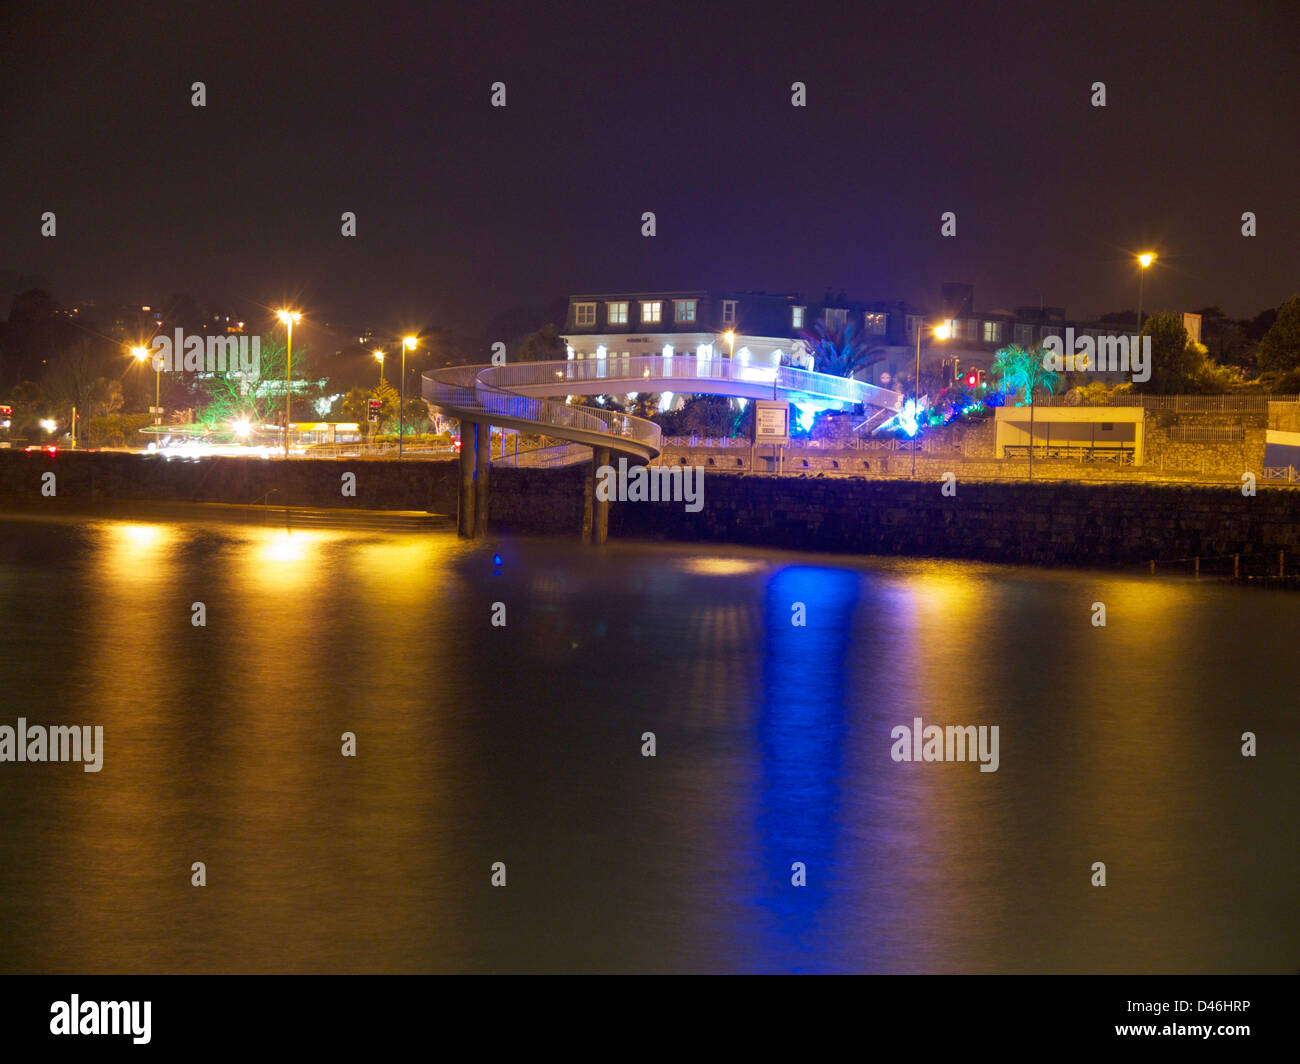 Torquay seafront at night Stock Photo